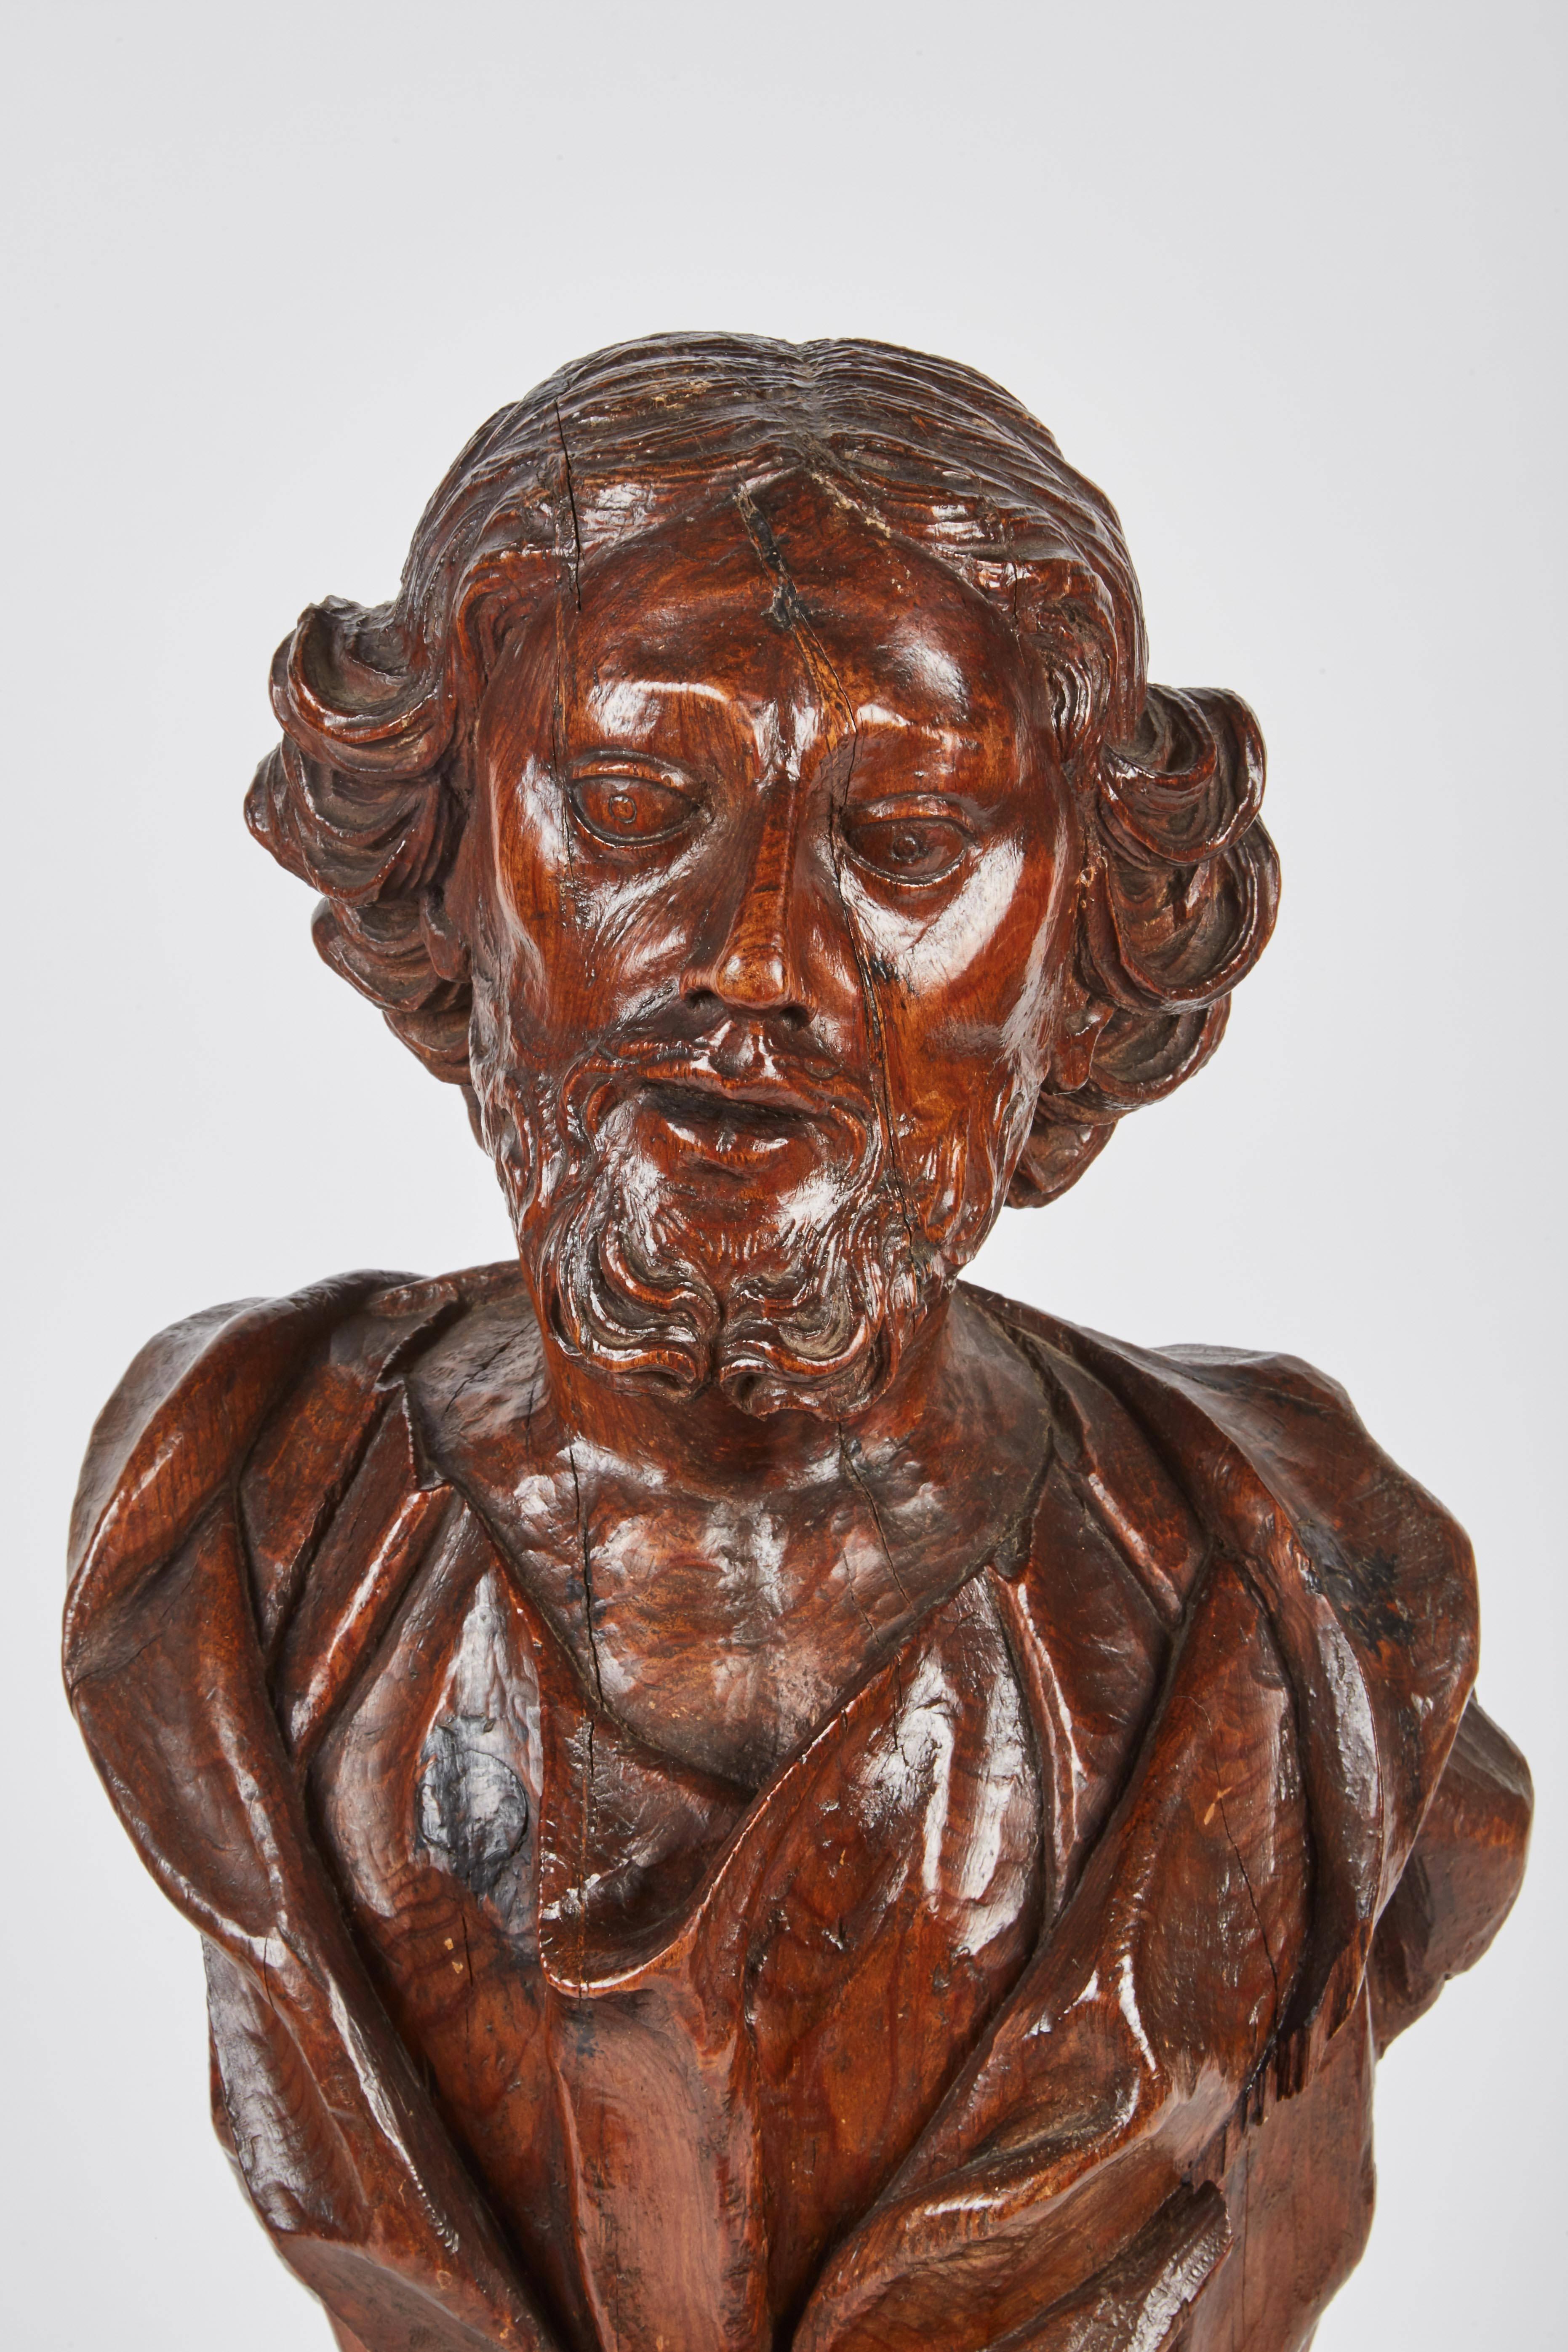 A marvelous bust from circa 1750-1759 Italian Renaissance with drapery and foliage carvings.